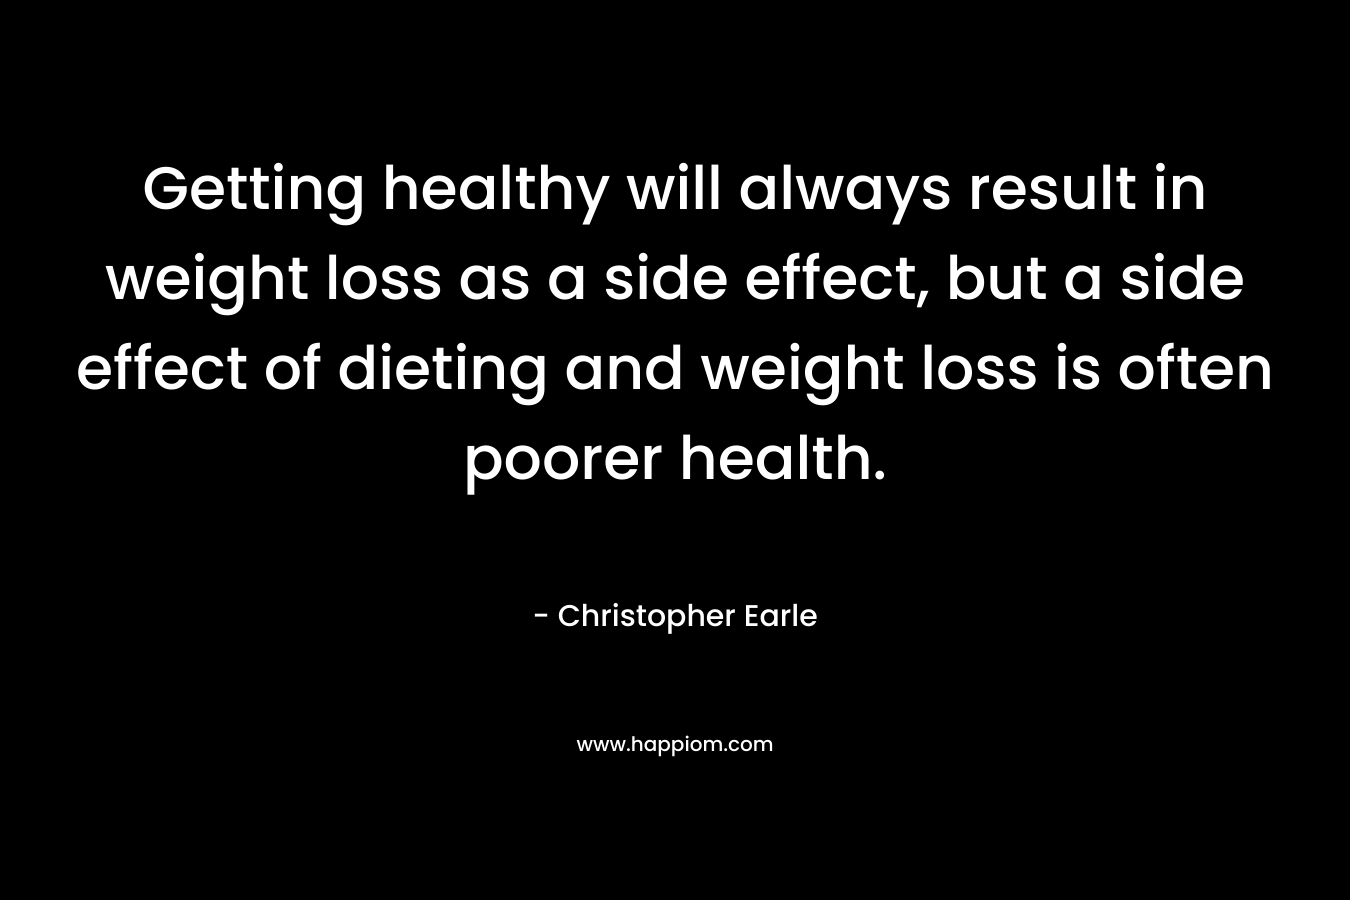 Getting healthy will always result in weight loss as a side effect, but a side effect of dieting and weight loss is often poorer health.